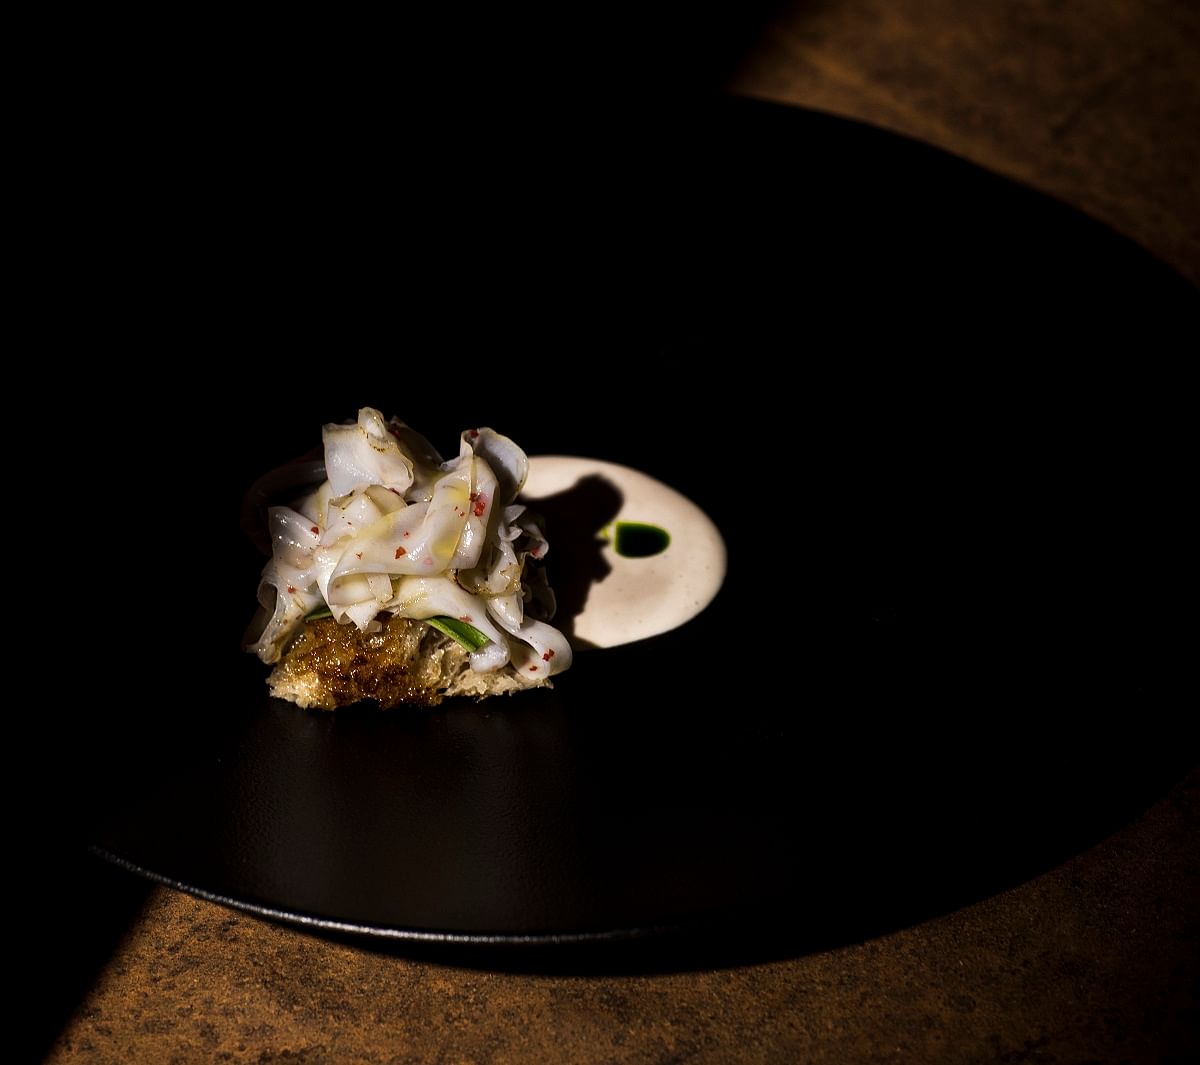 One of Ros' dishes, Cuttlefish Lard.